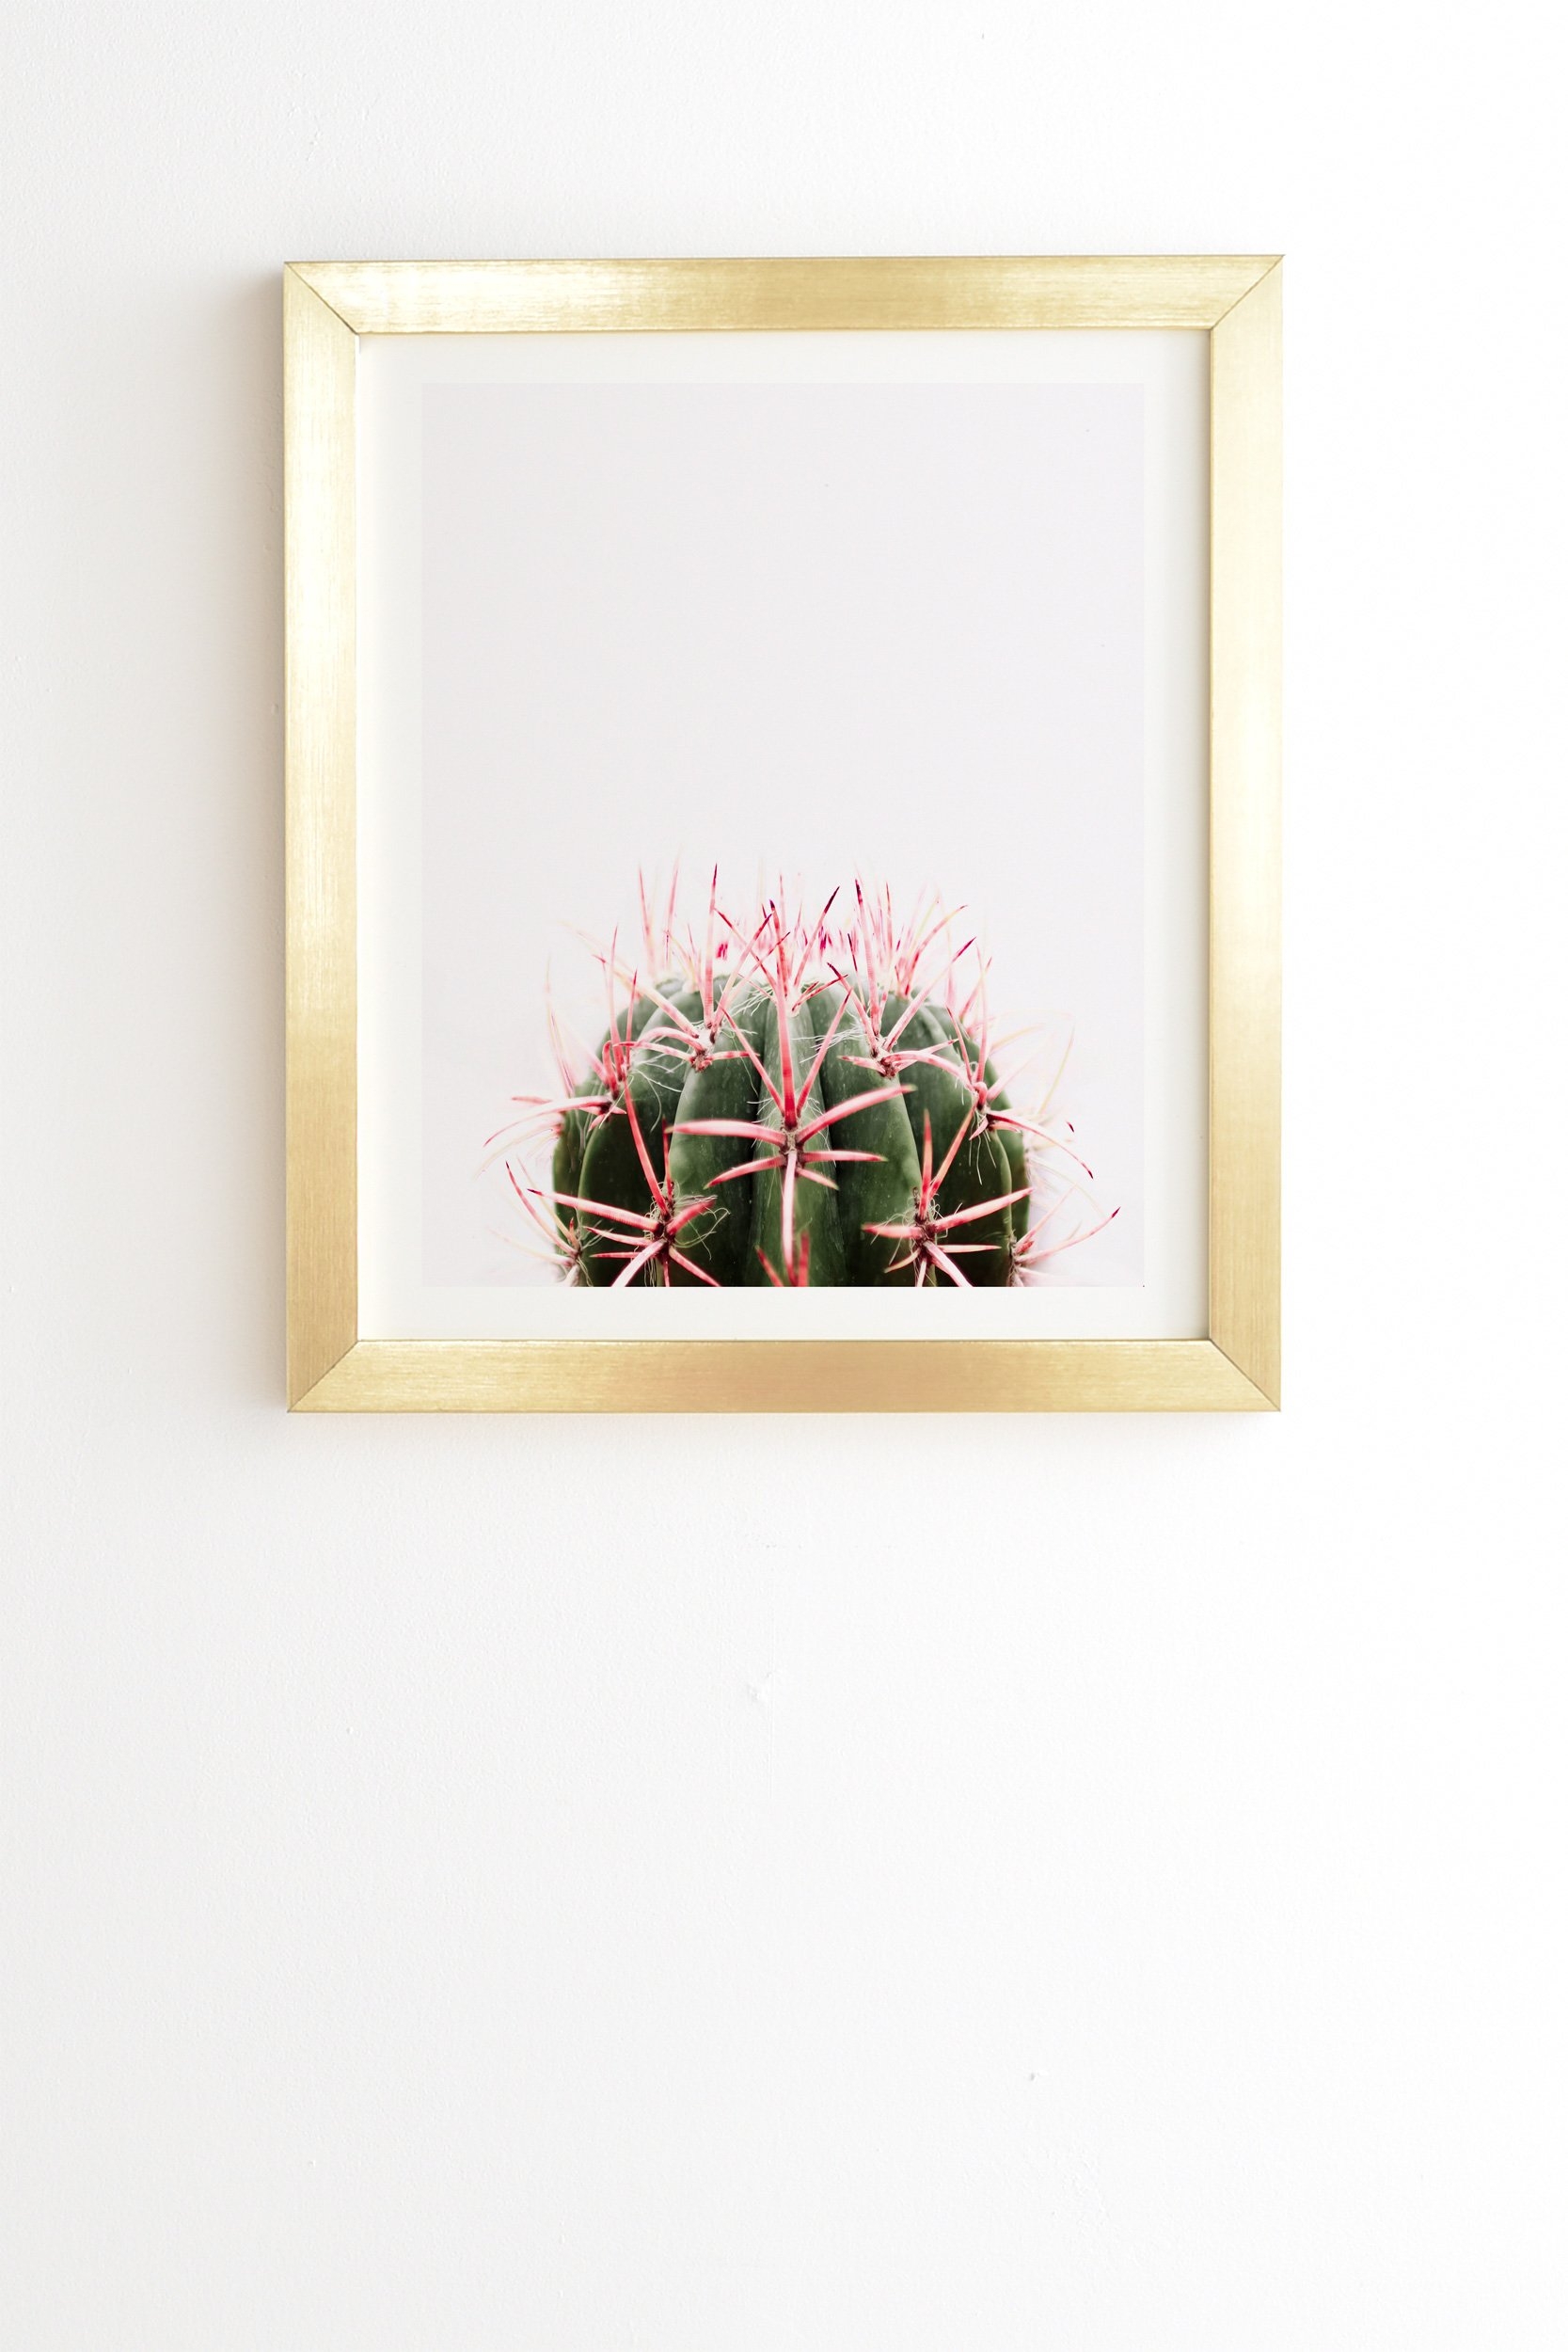 Ingrid Beddoes cactus red Gold Framed Wall Art - 30" x 30" - Image 1